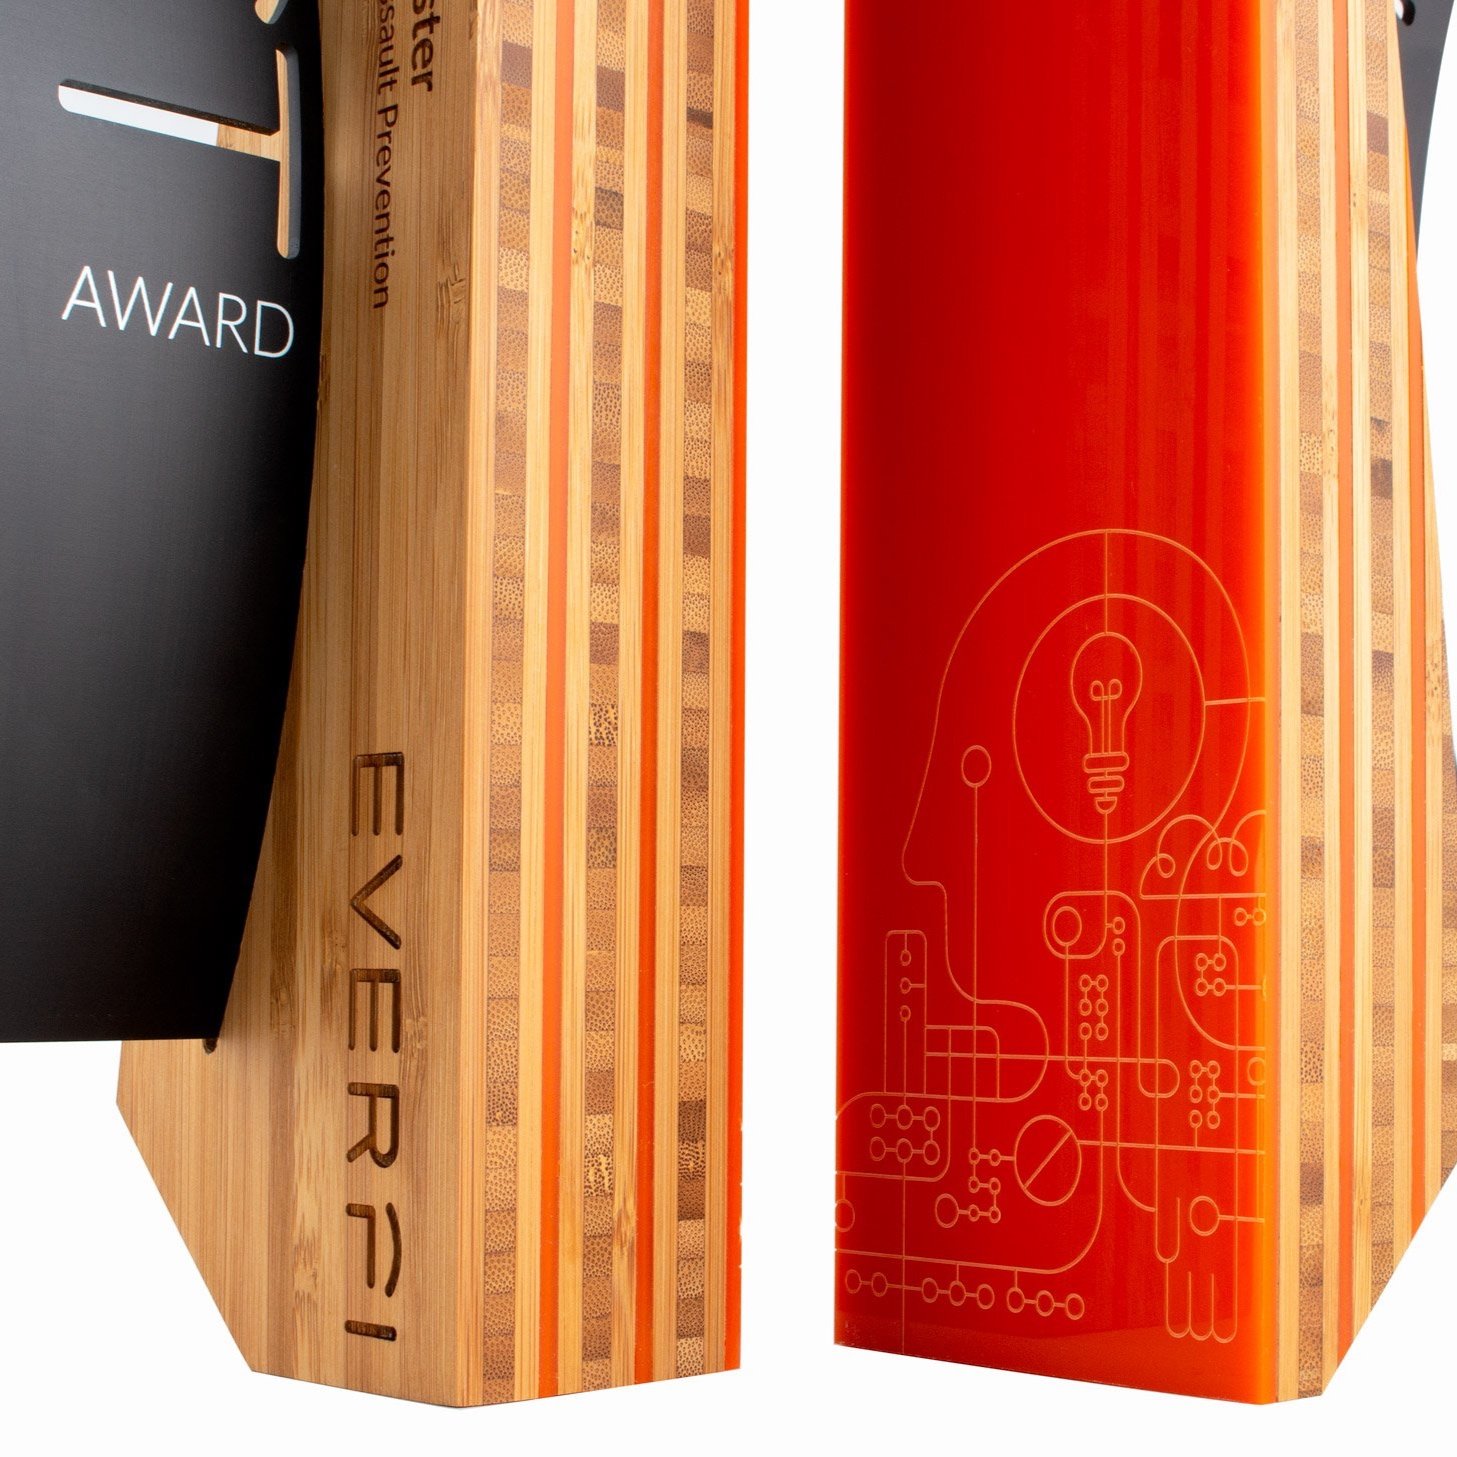 awards for association unique and modern design based on clients brand and branding 